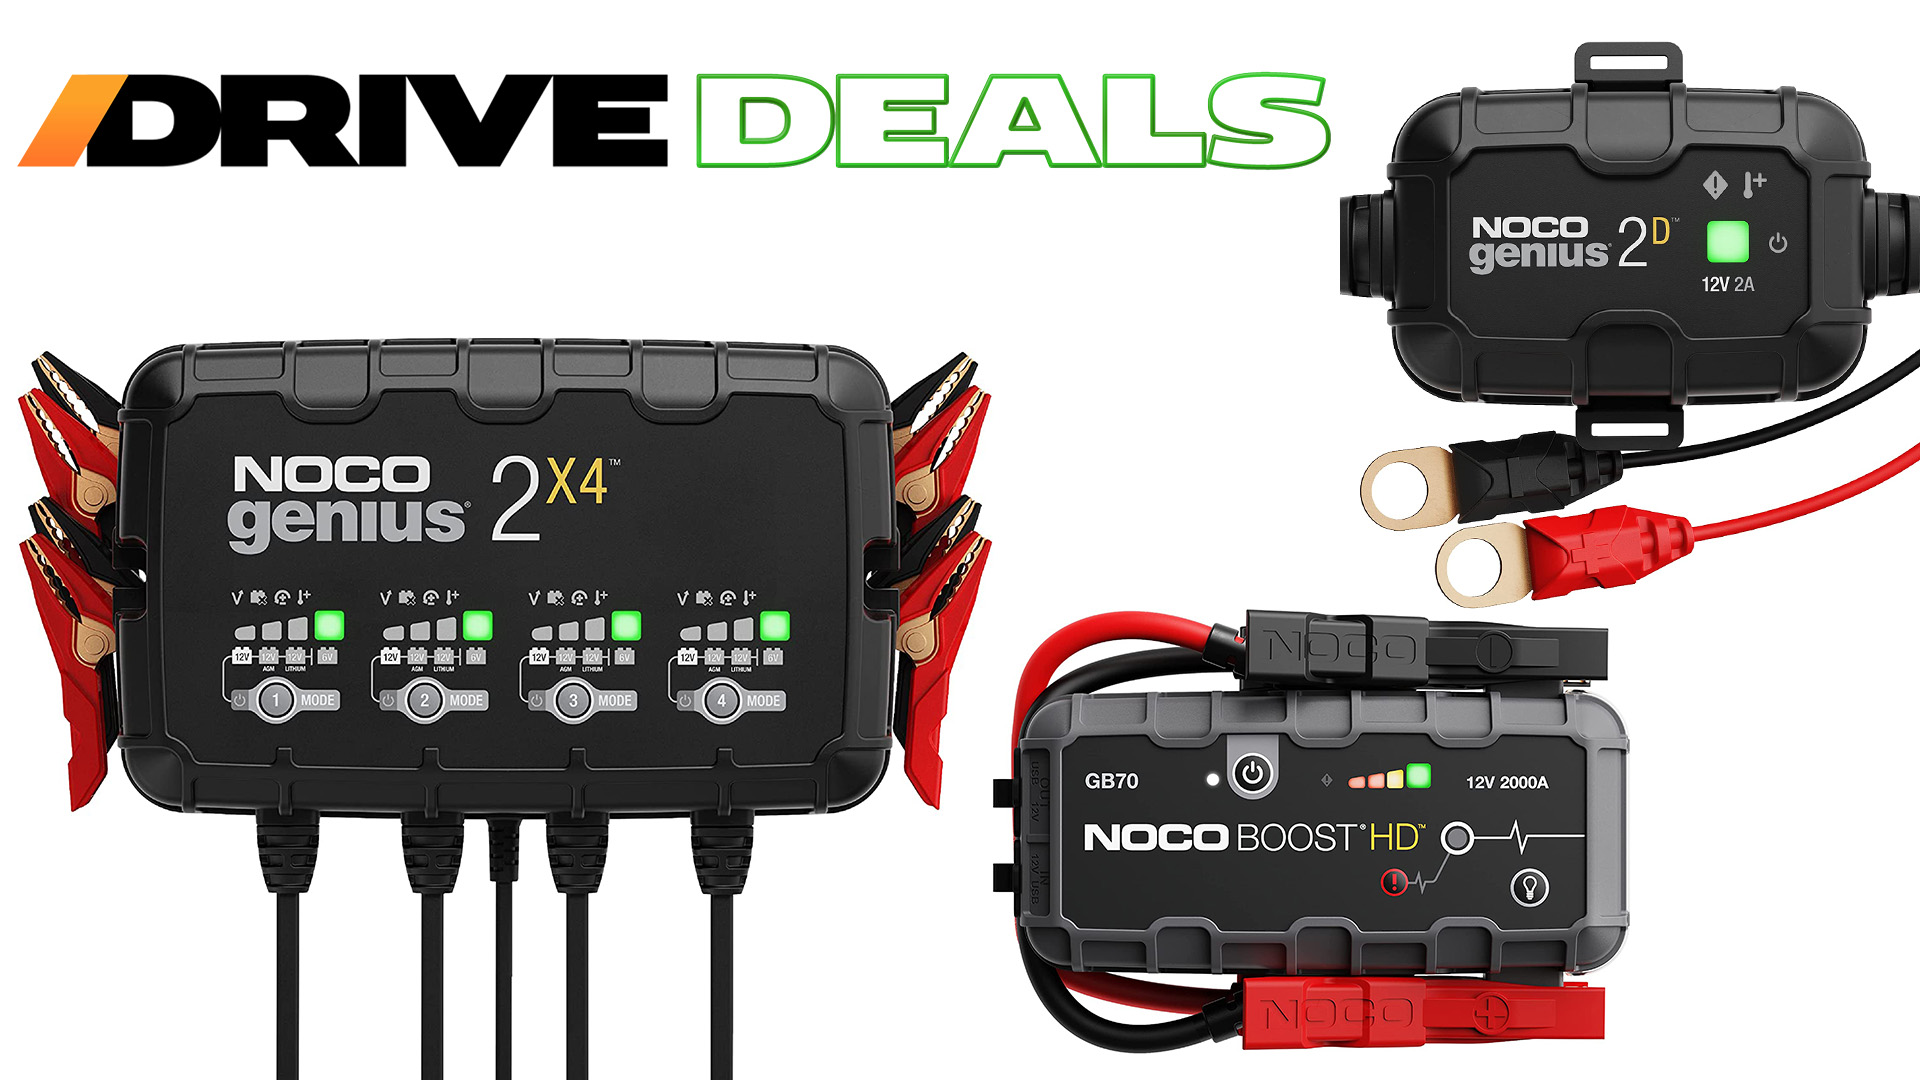 There's No Reason Not to Take Advantage of These NOCO Deals